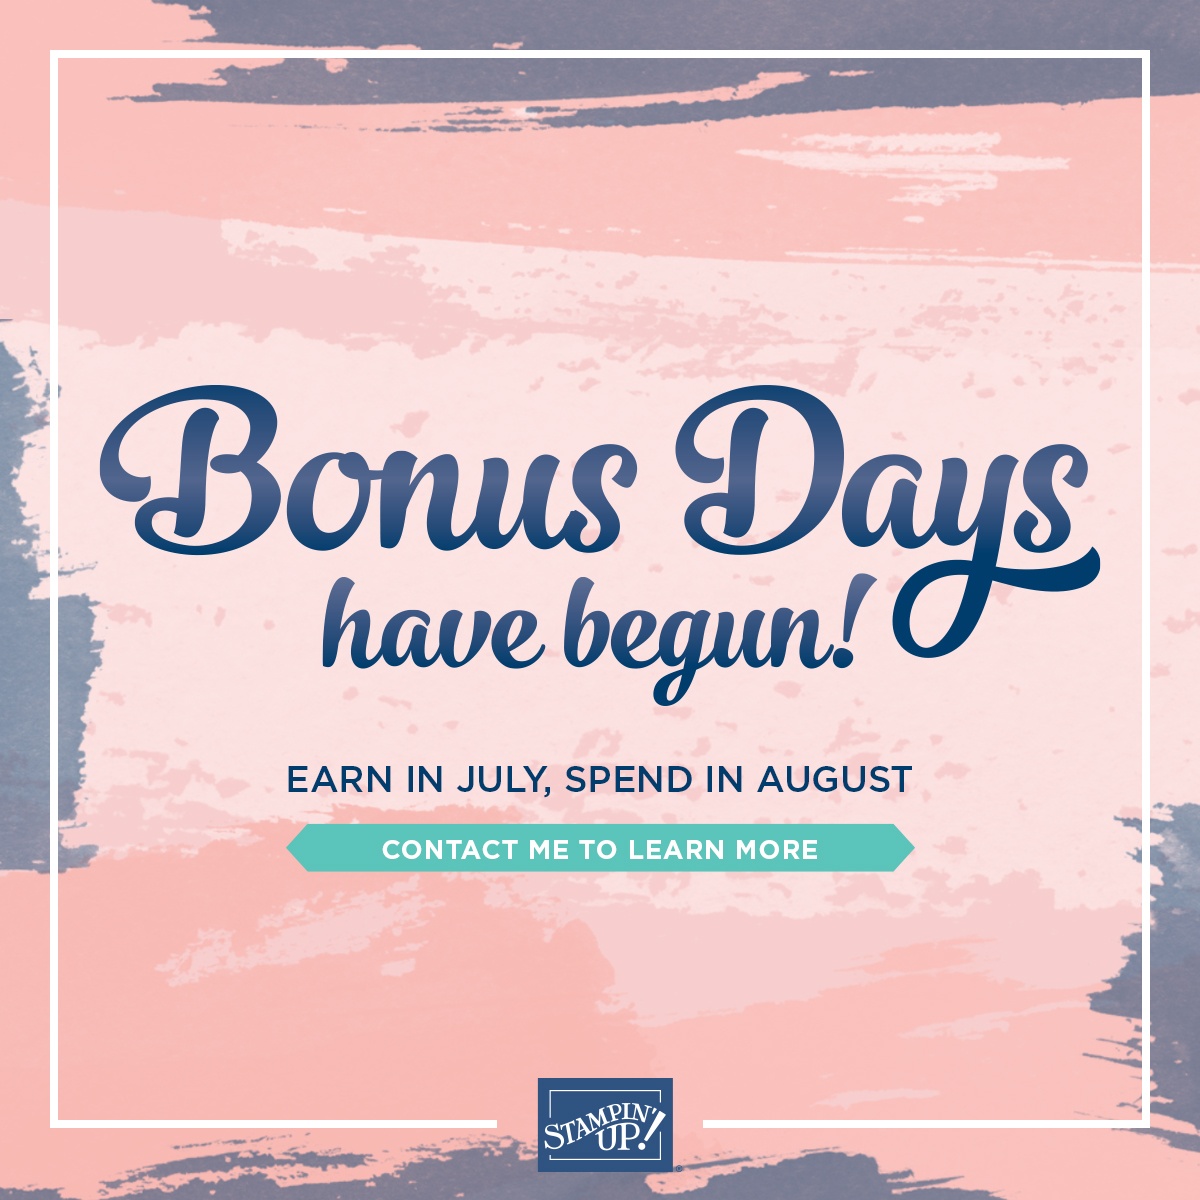 It's Bonus Days! What is that? Place a min. $50.00 Online Order (before shipping and tax) between July 1 - August 3, 2020 and earn a coupon code for $5.00 off your order placed August 4 - 31, 2020. You can earn as many coupon codes as you want; there is no limit! See my blog here for details: https://wp.me/p59VWq-bjw